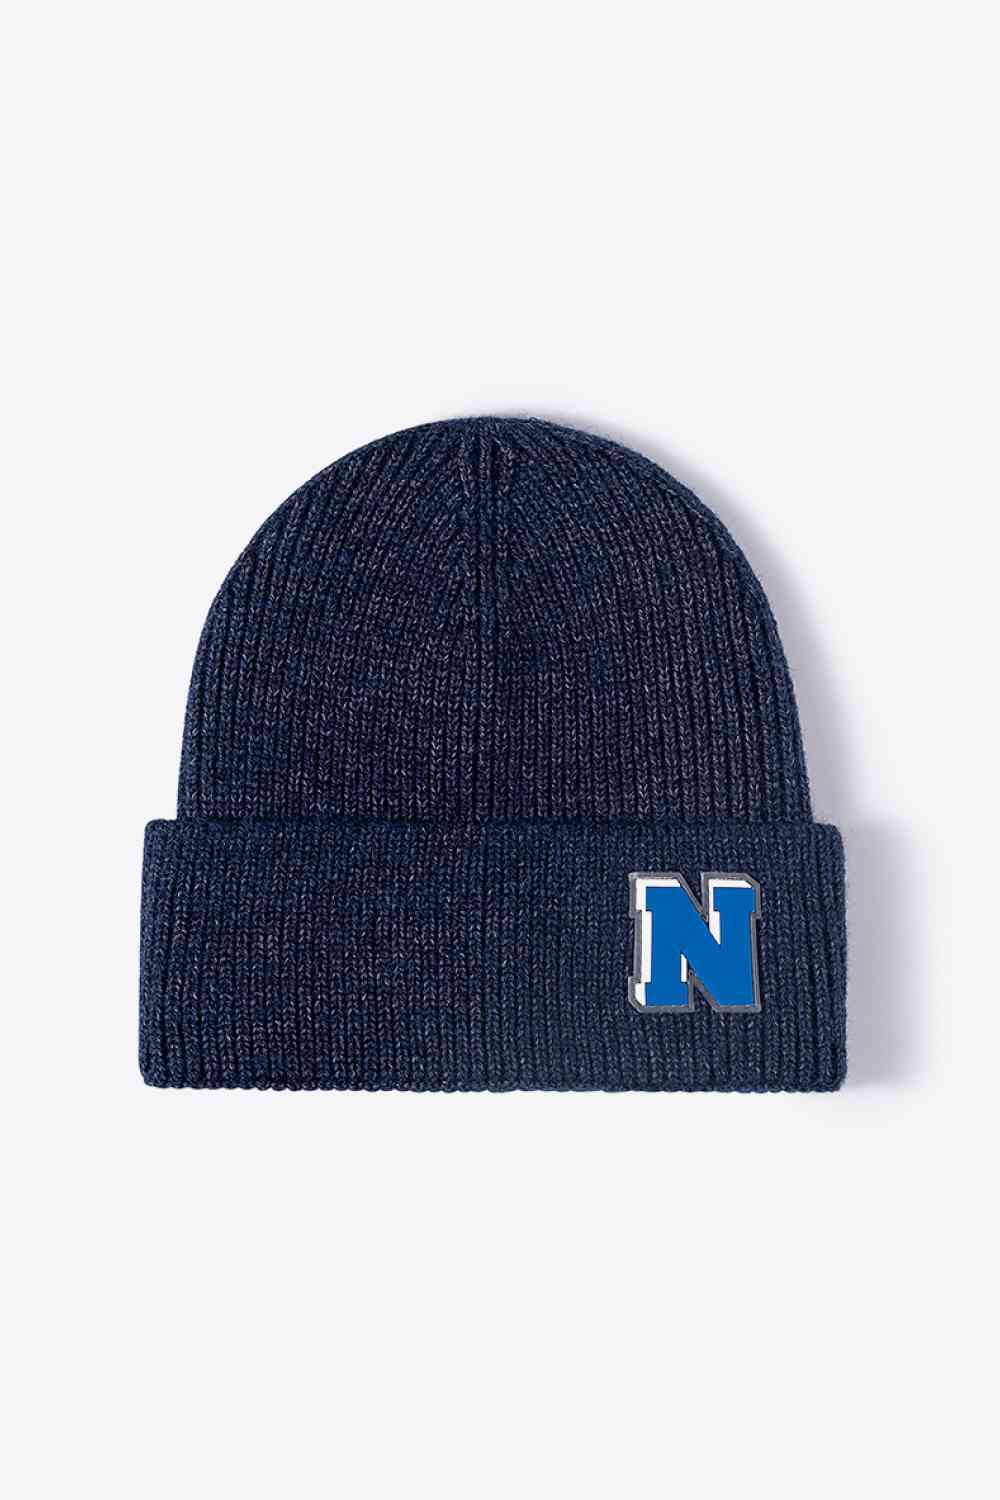 Letter N Patch Cuffed Knit Beanie Navy One Size